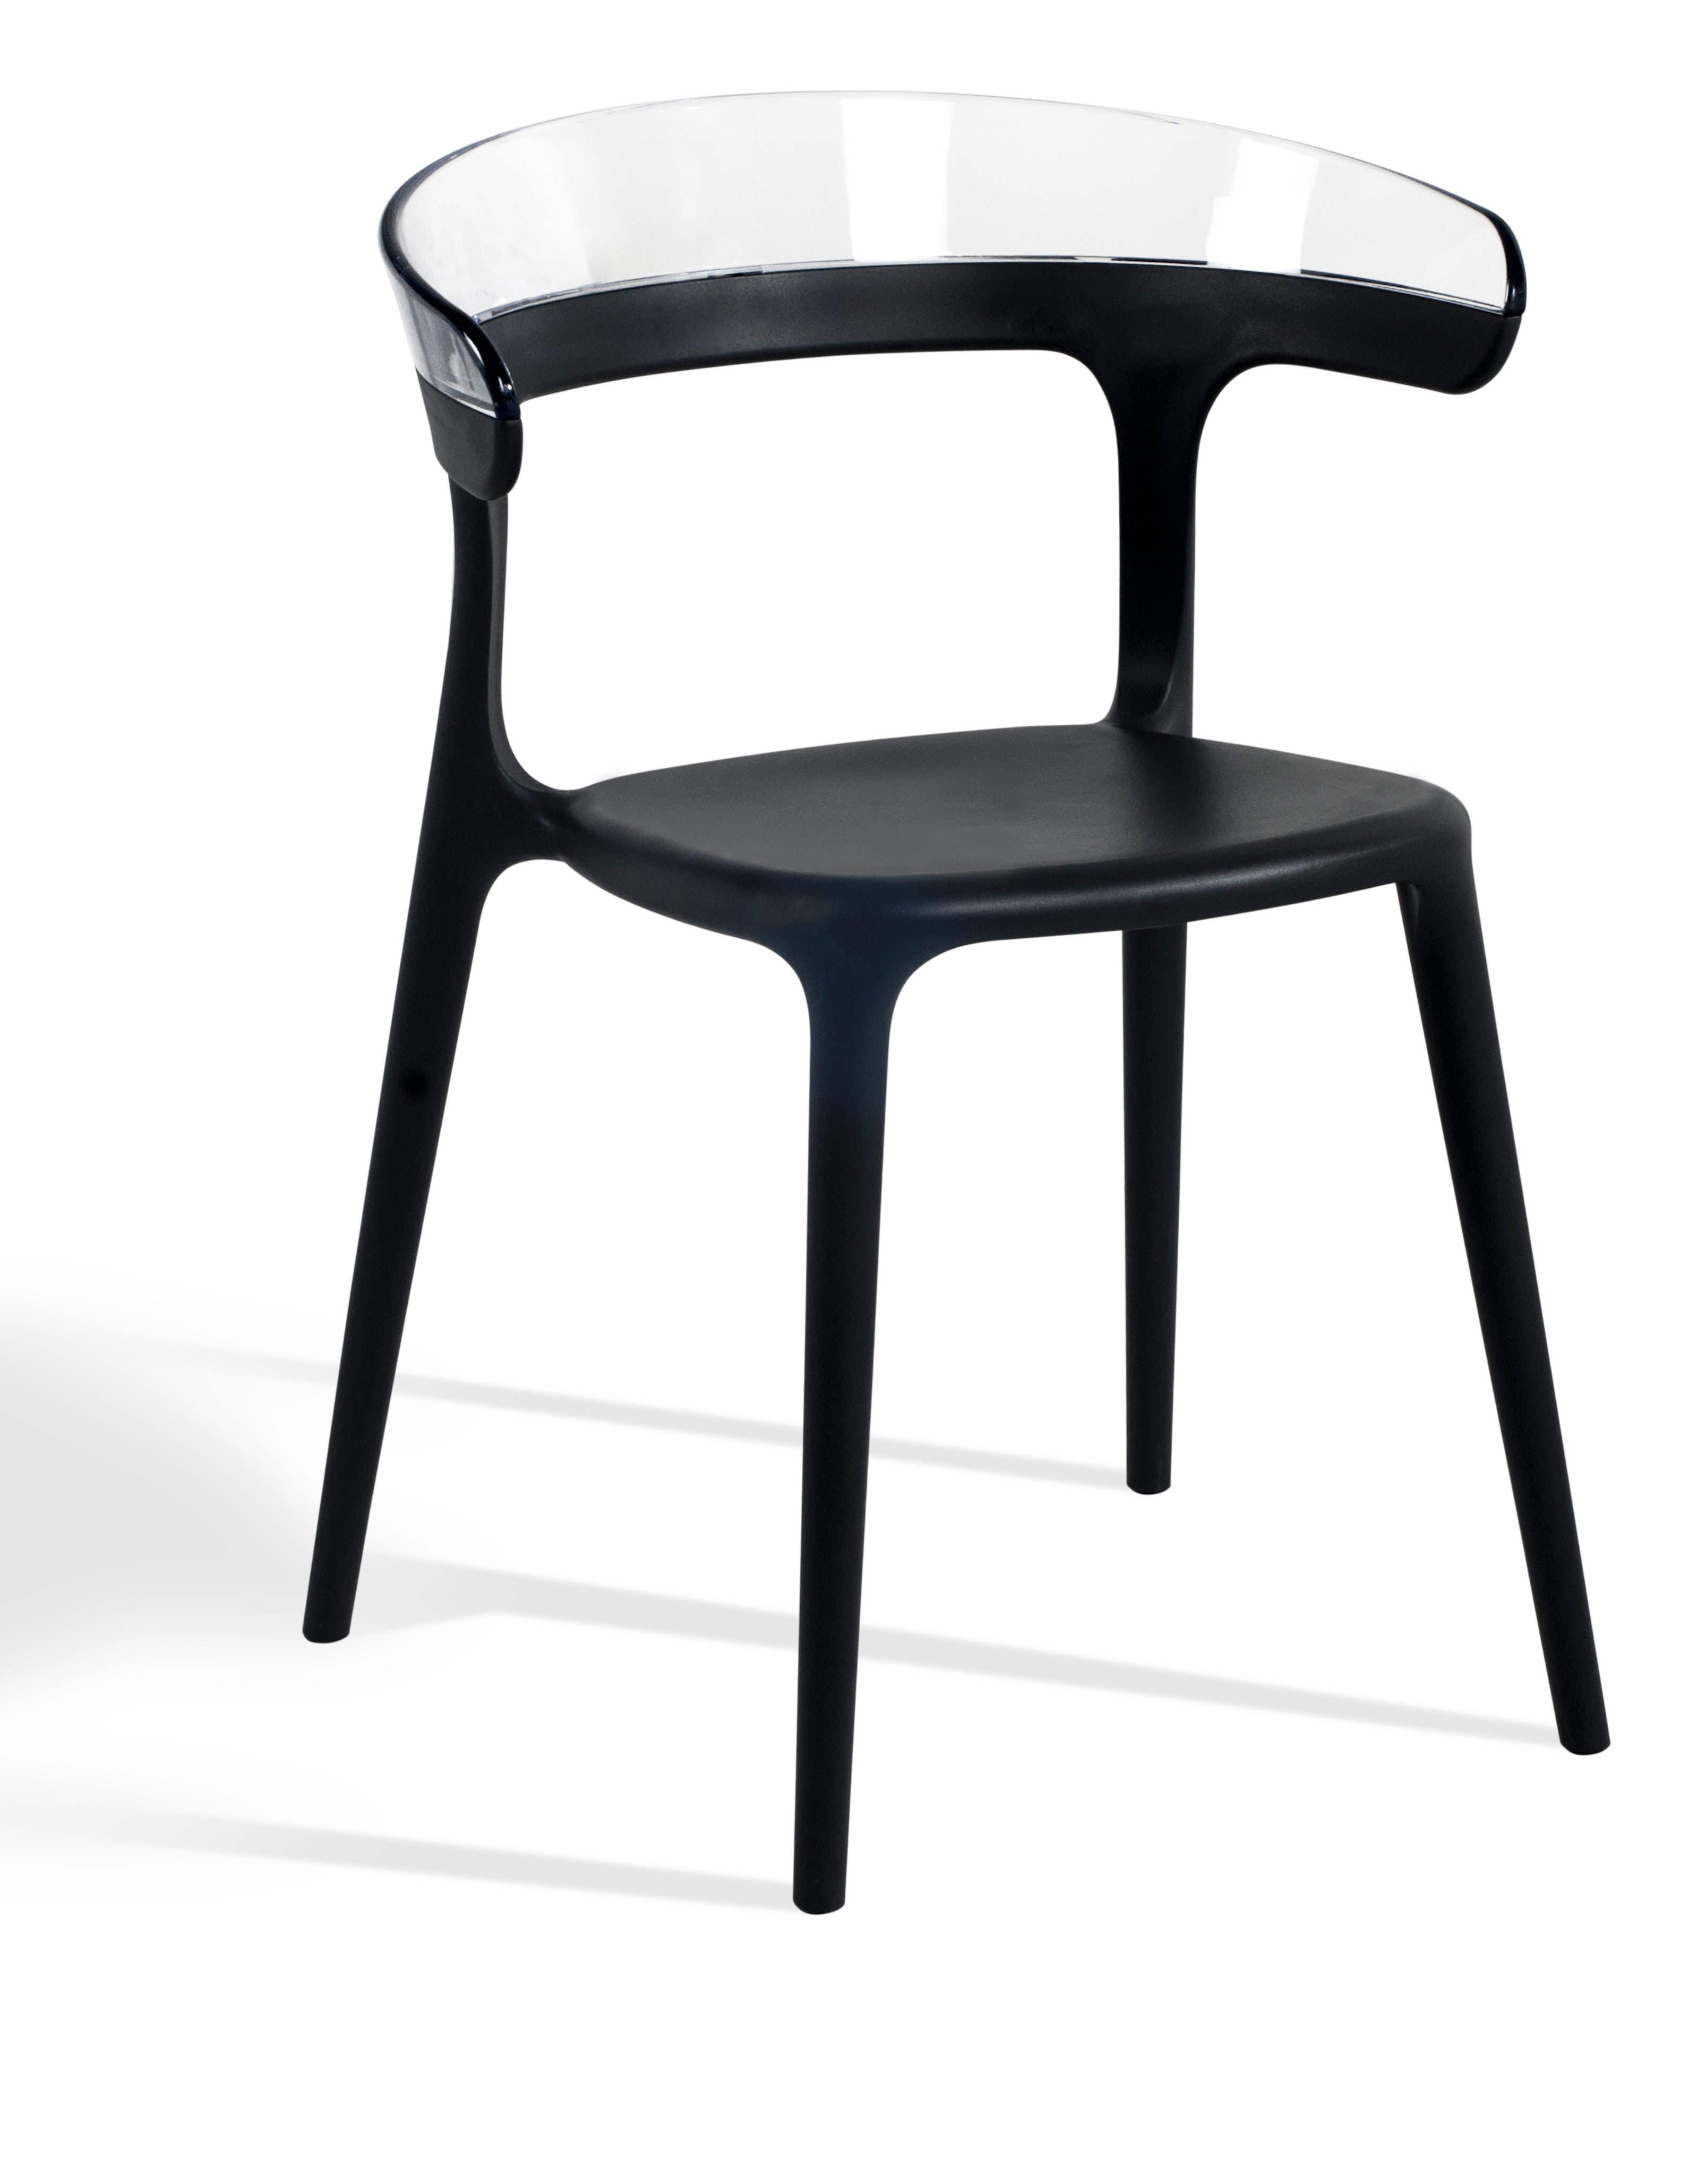 Mia Patio Dining Chair in Black and Clear- (Set of 2)